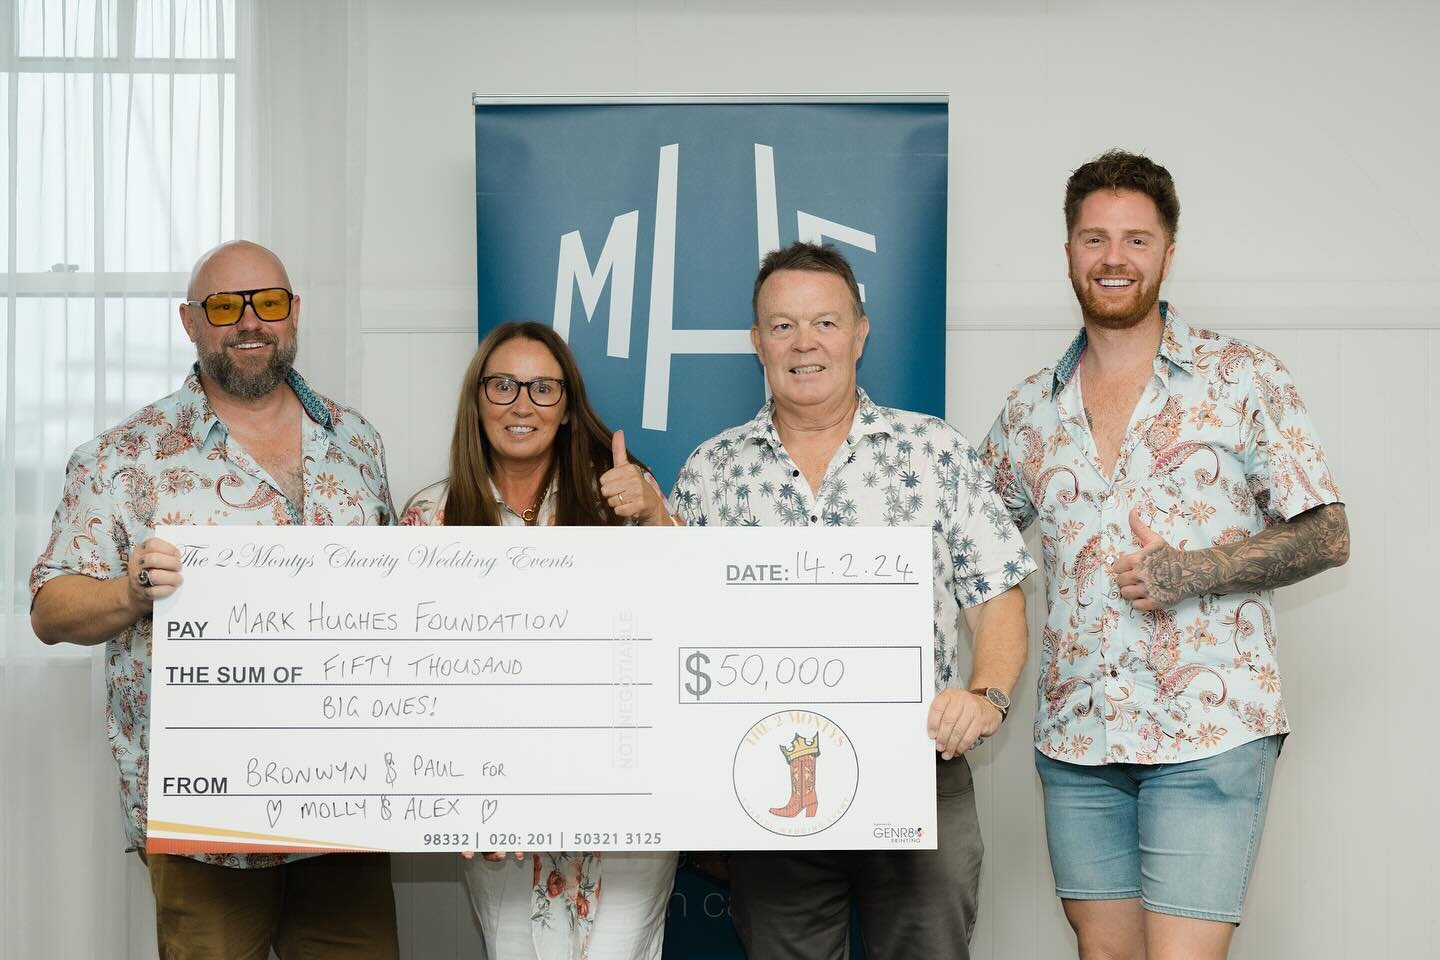 Our package valued at $102k and was sold to the highest bidder at $50,000 donated straight to @markhughesfoundation!!!!! 

To top off the night the winning bid was from a very special family to MHF, Bronwyn and Paul, placing the winning bid for their